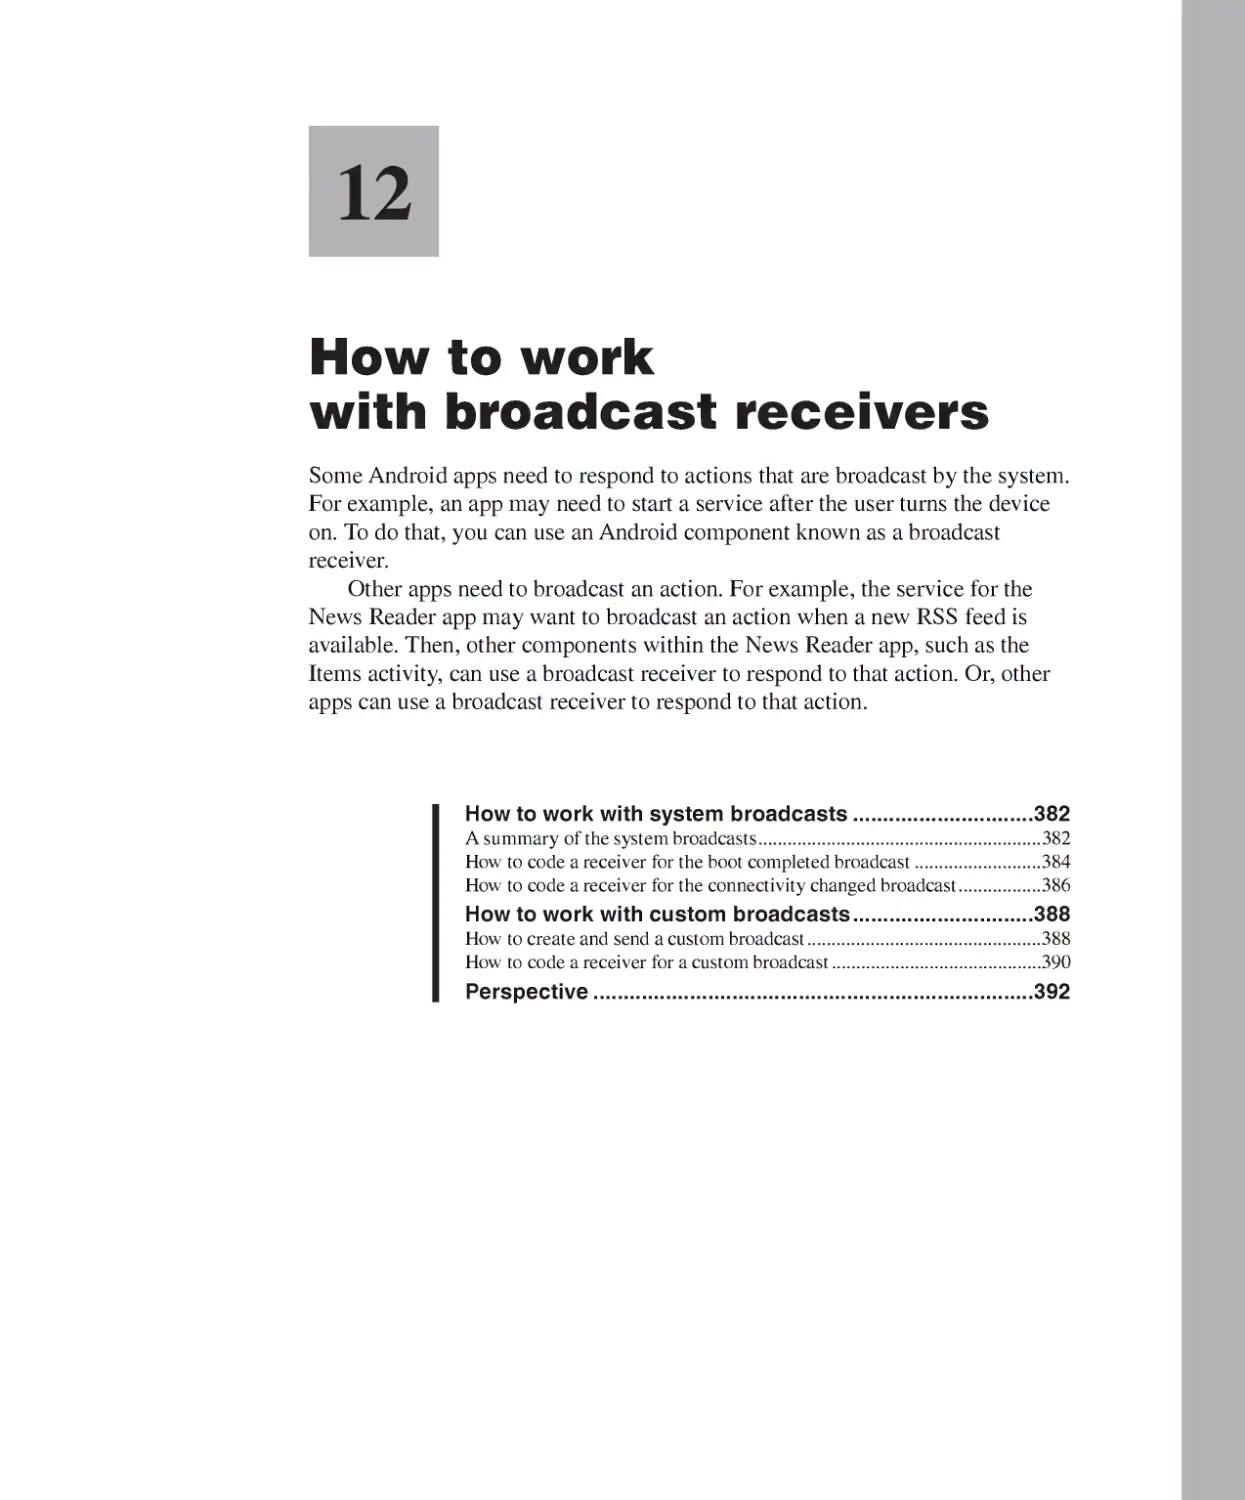 Chapter 12 - How to Work with Broadcast Receivers